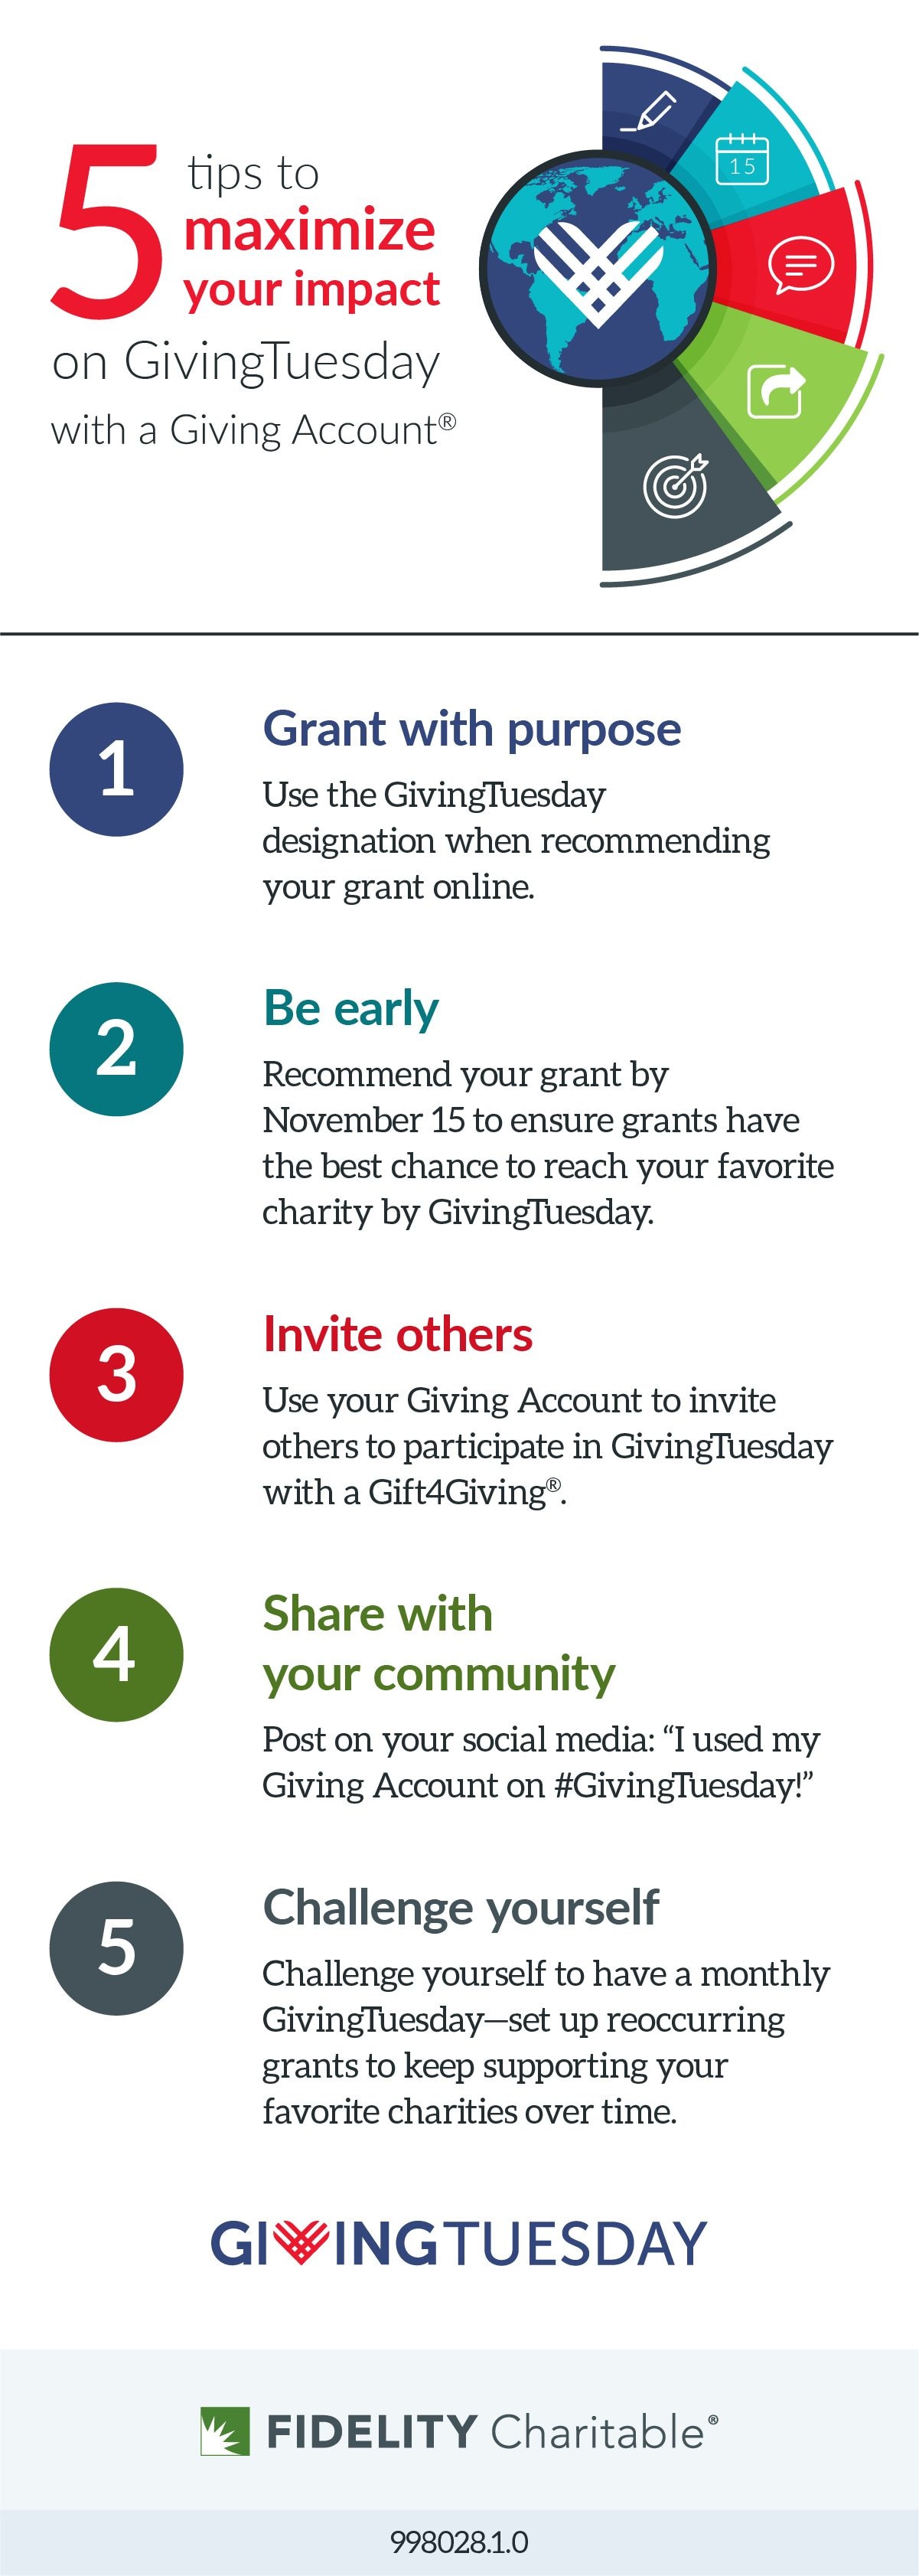 5 tips to maximize your impact for GivingTuesday 2021